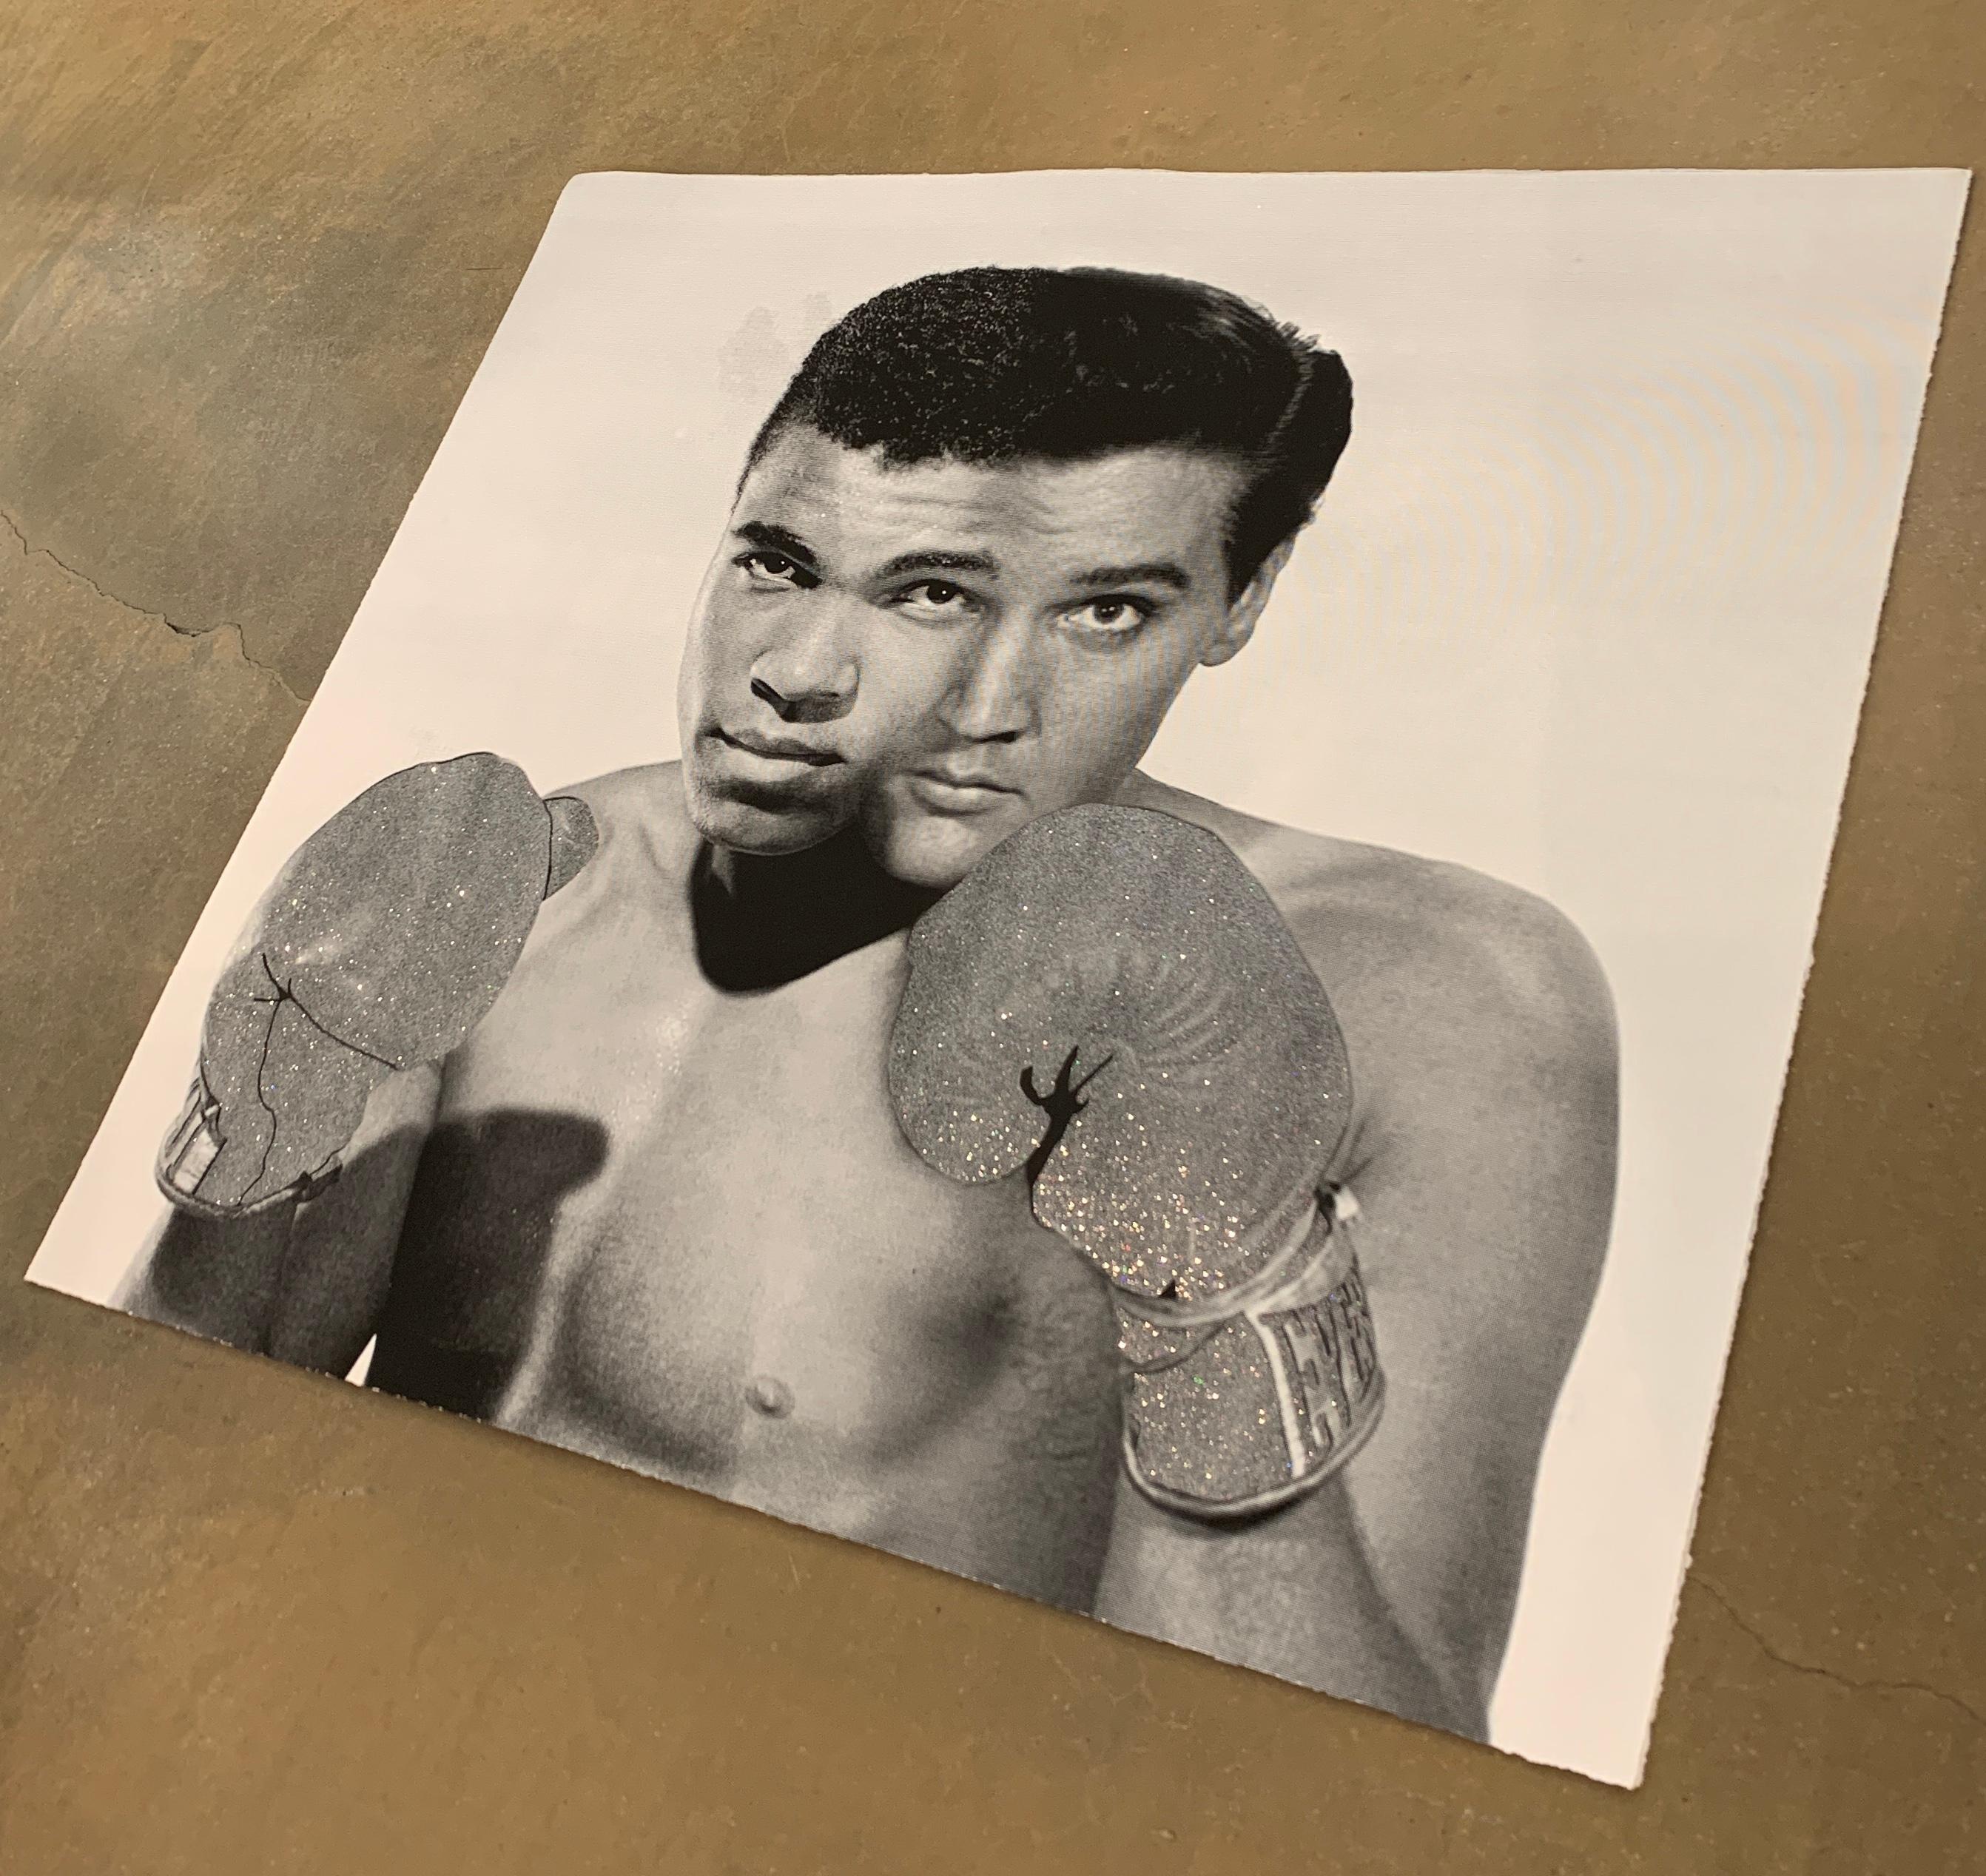 The Greatest Silver-Rainbow AP, Julian Prolman Elvis Mohammed Ali Boxing Glove - Photograph by House of Orion